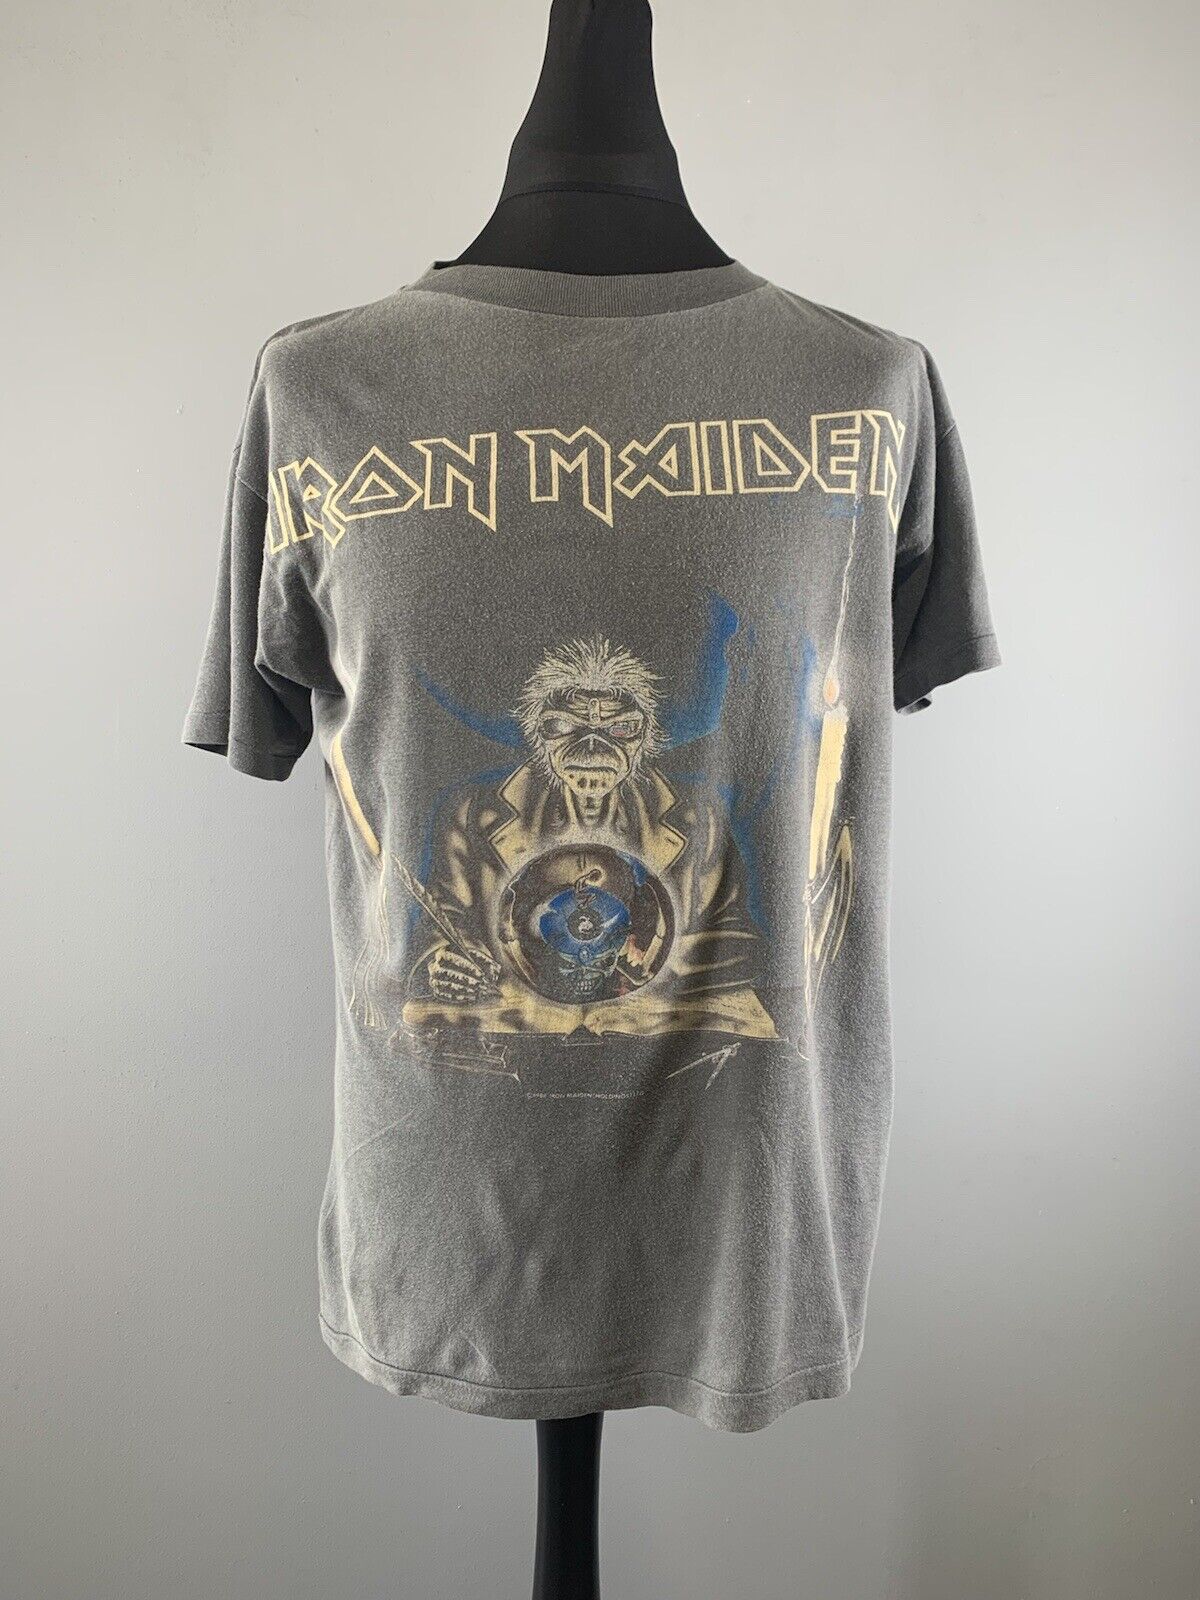 Iron Maiden Shirt Seventh Son Of A Seventh Son Official Vintage World Tour 1988